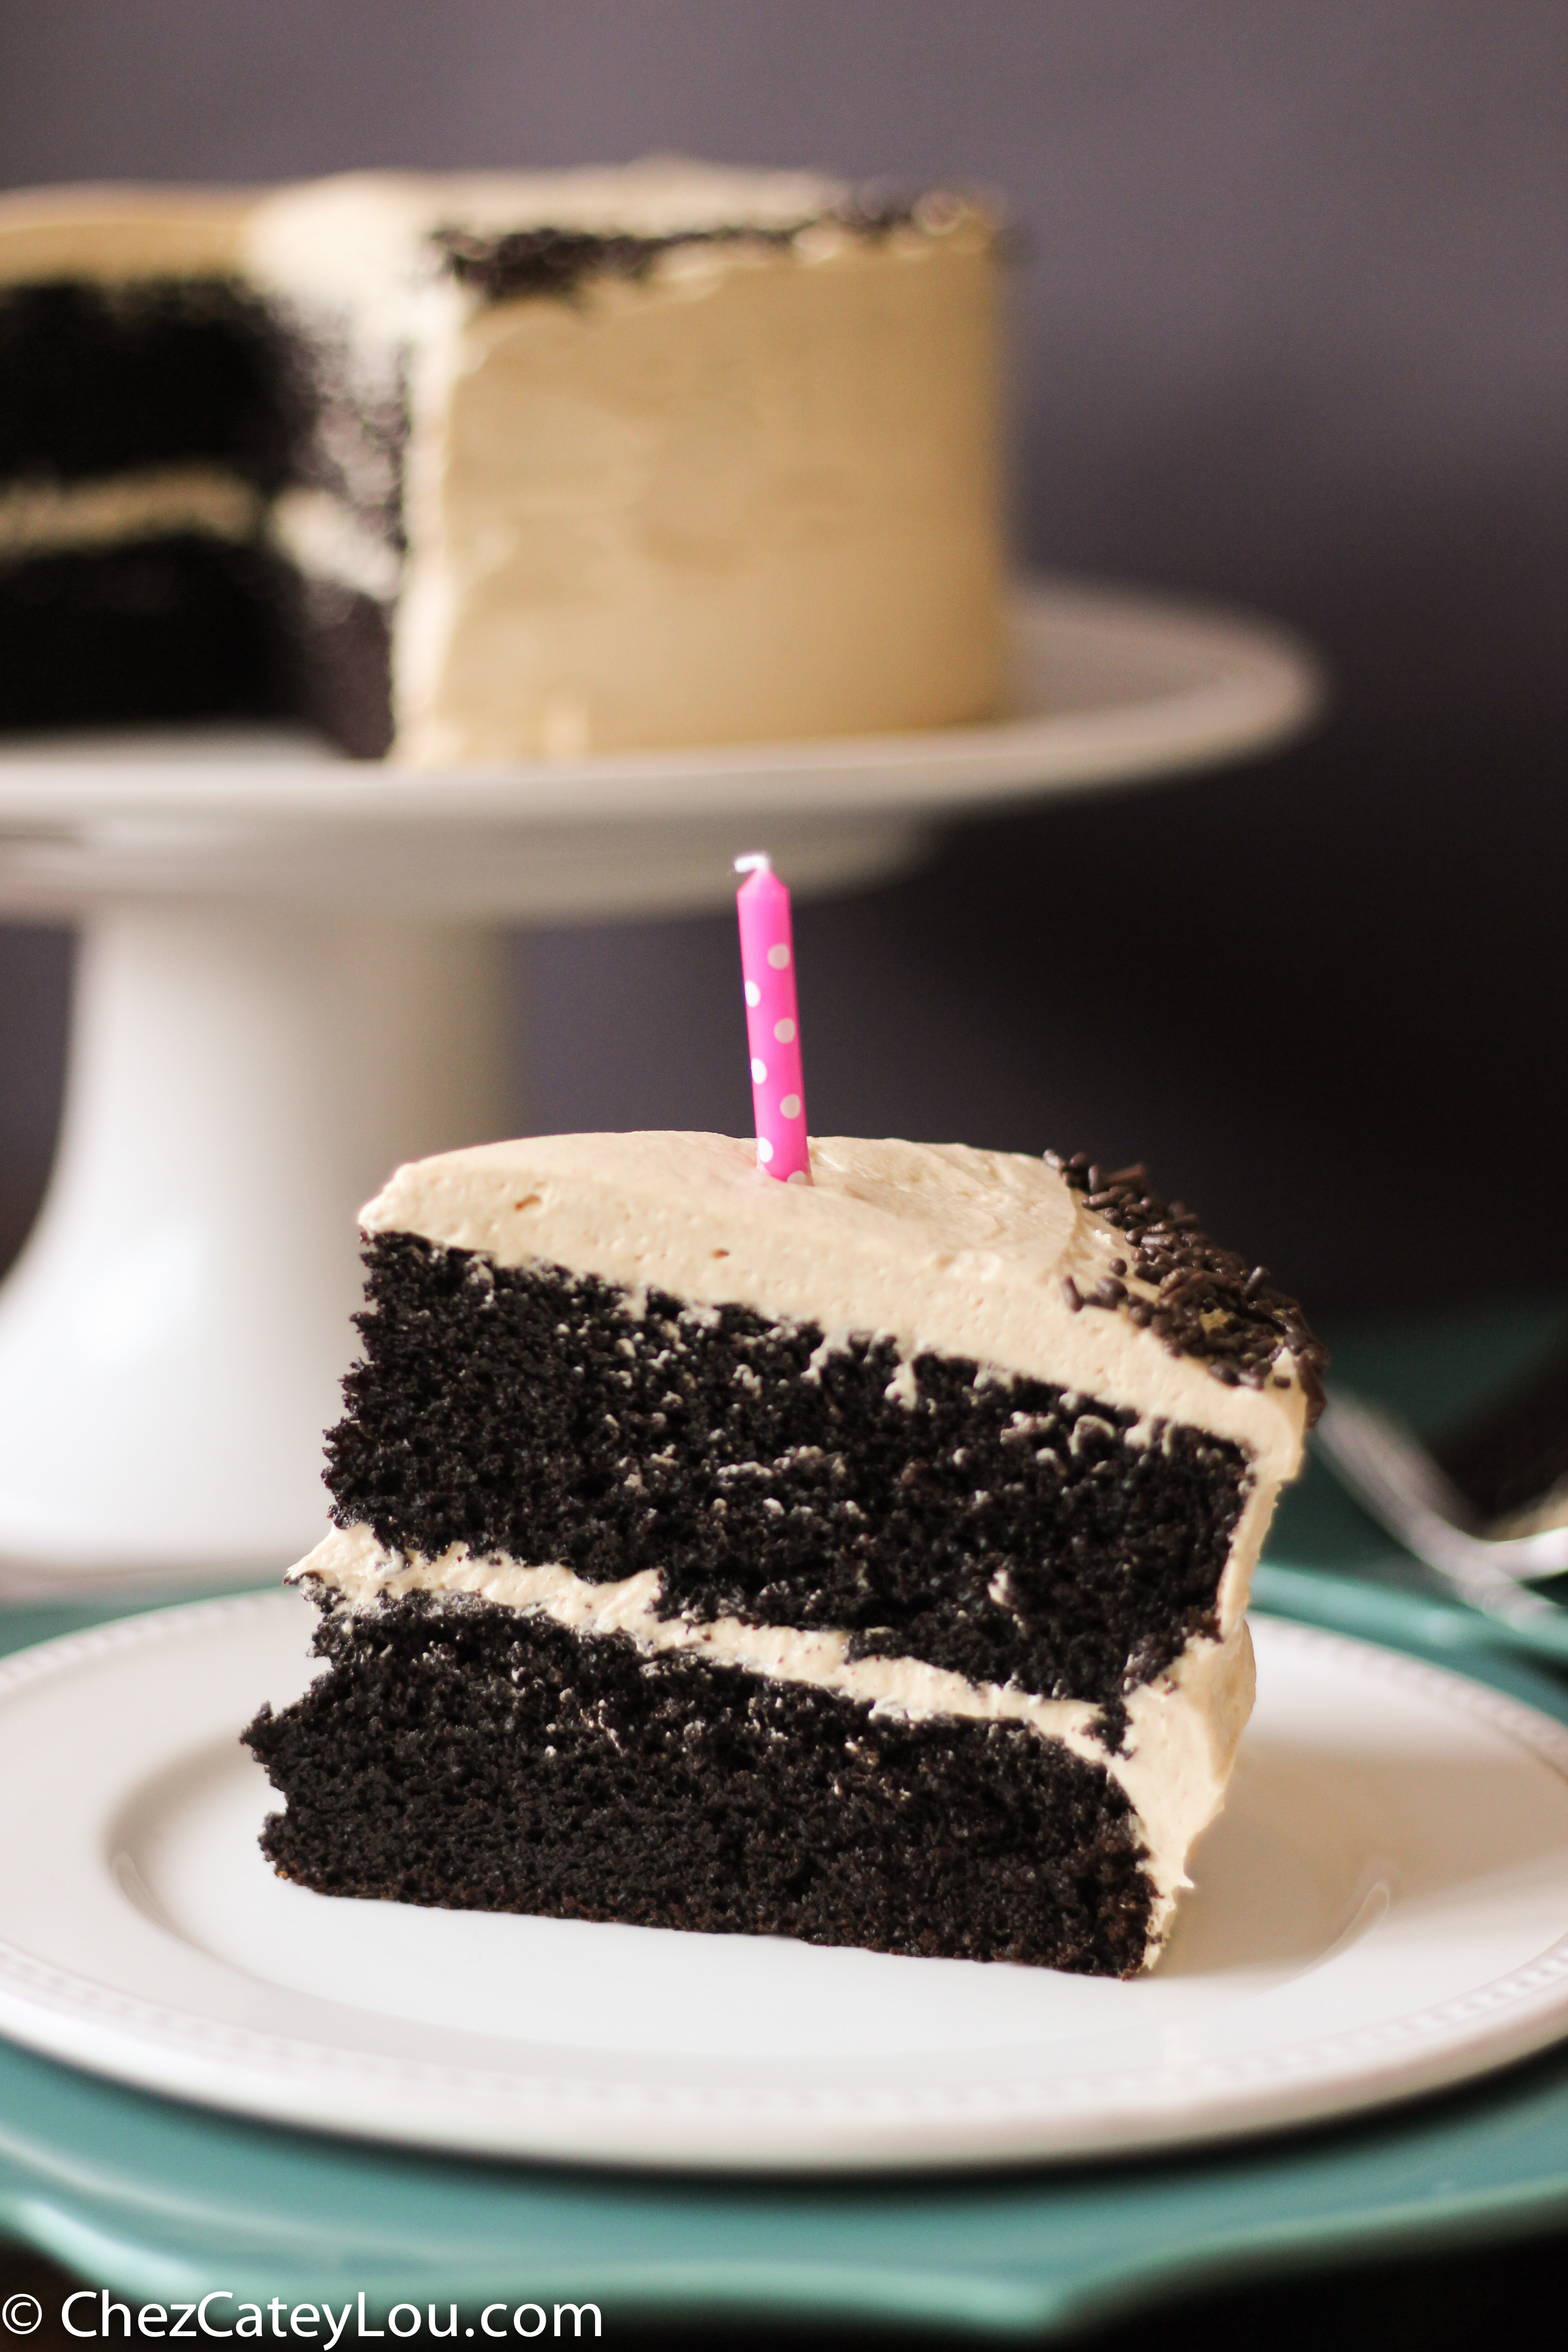 Chocolate Cake with Peanut Butter Buttercream Frosting